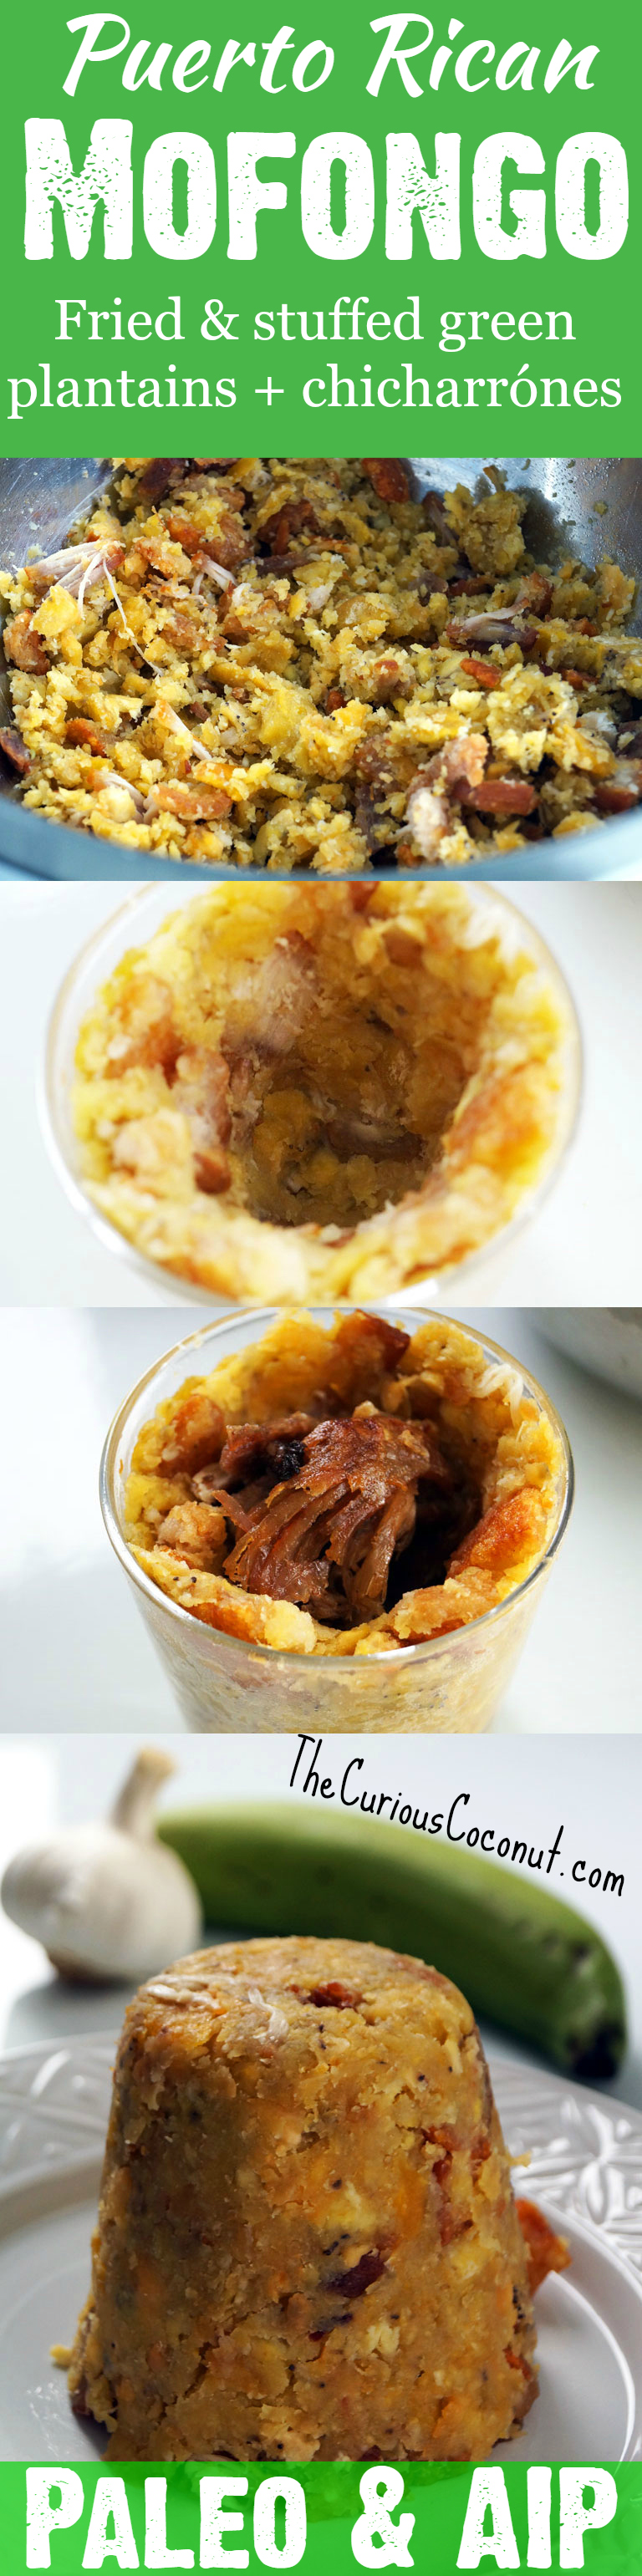 Puerto Rican Mofongo Relleno - Delicious fried green plantains with chicharrones or bacon stuffed wtih meat. A naturally Paleo and #AIP dish from an authentic family recipe! // TheCuriousCoconut.com